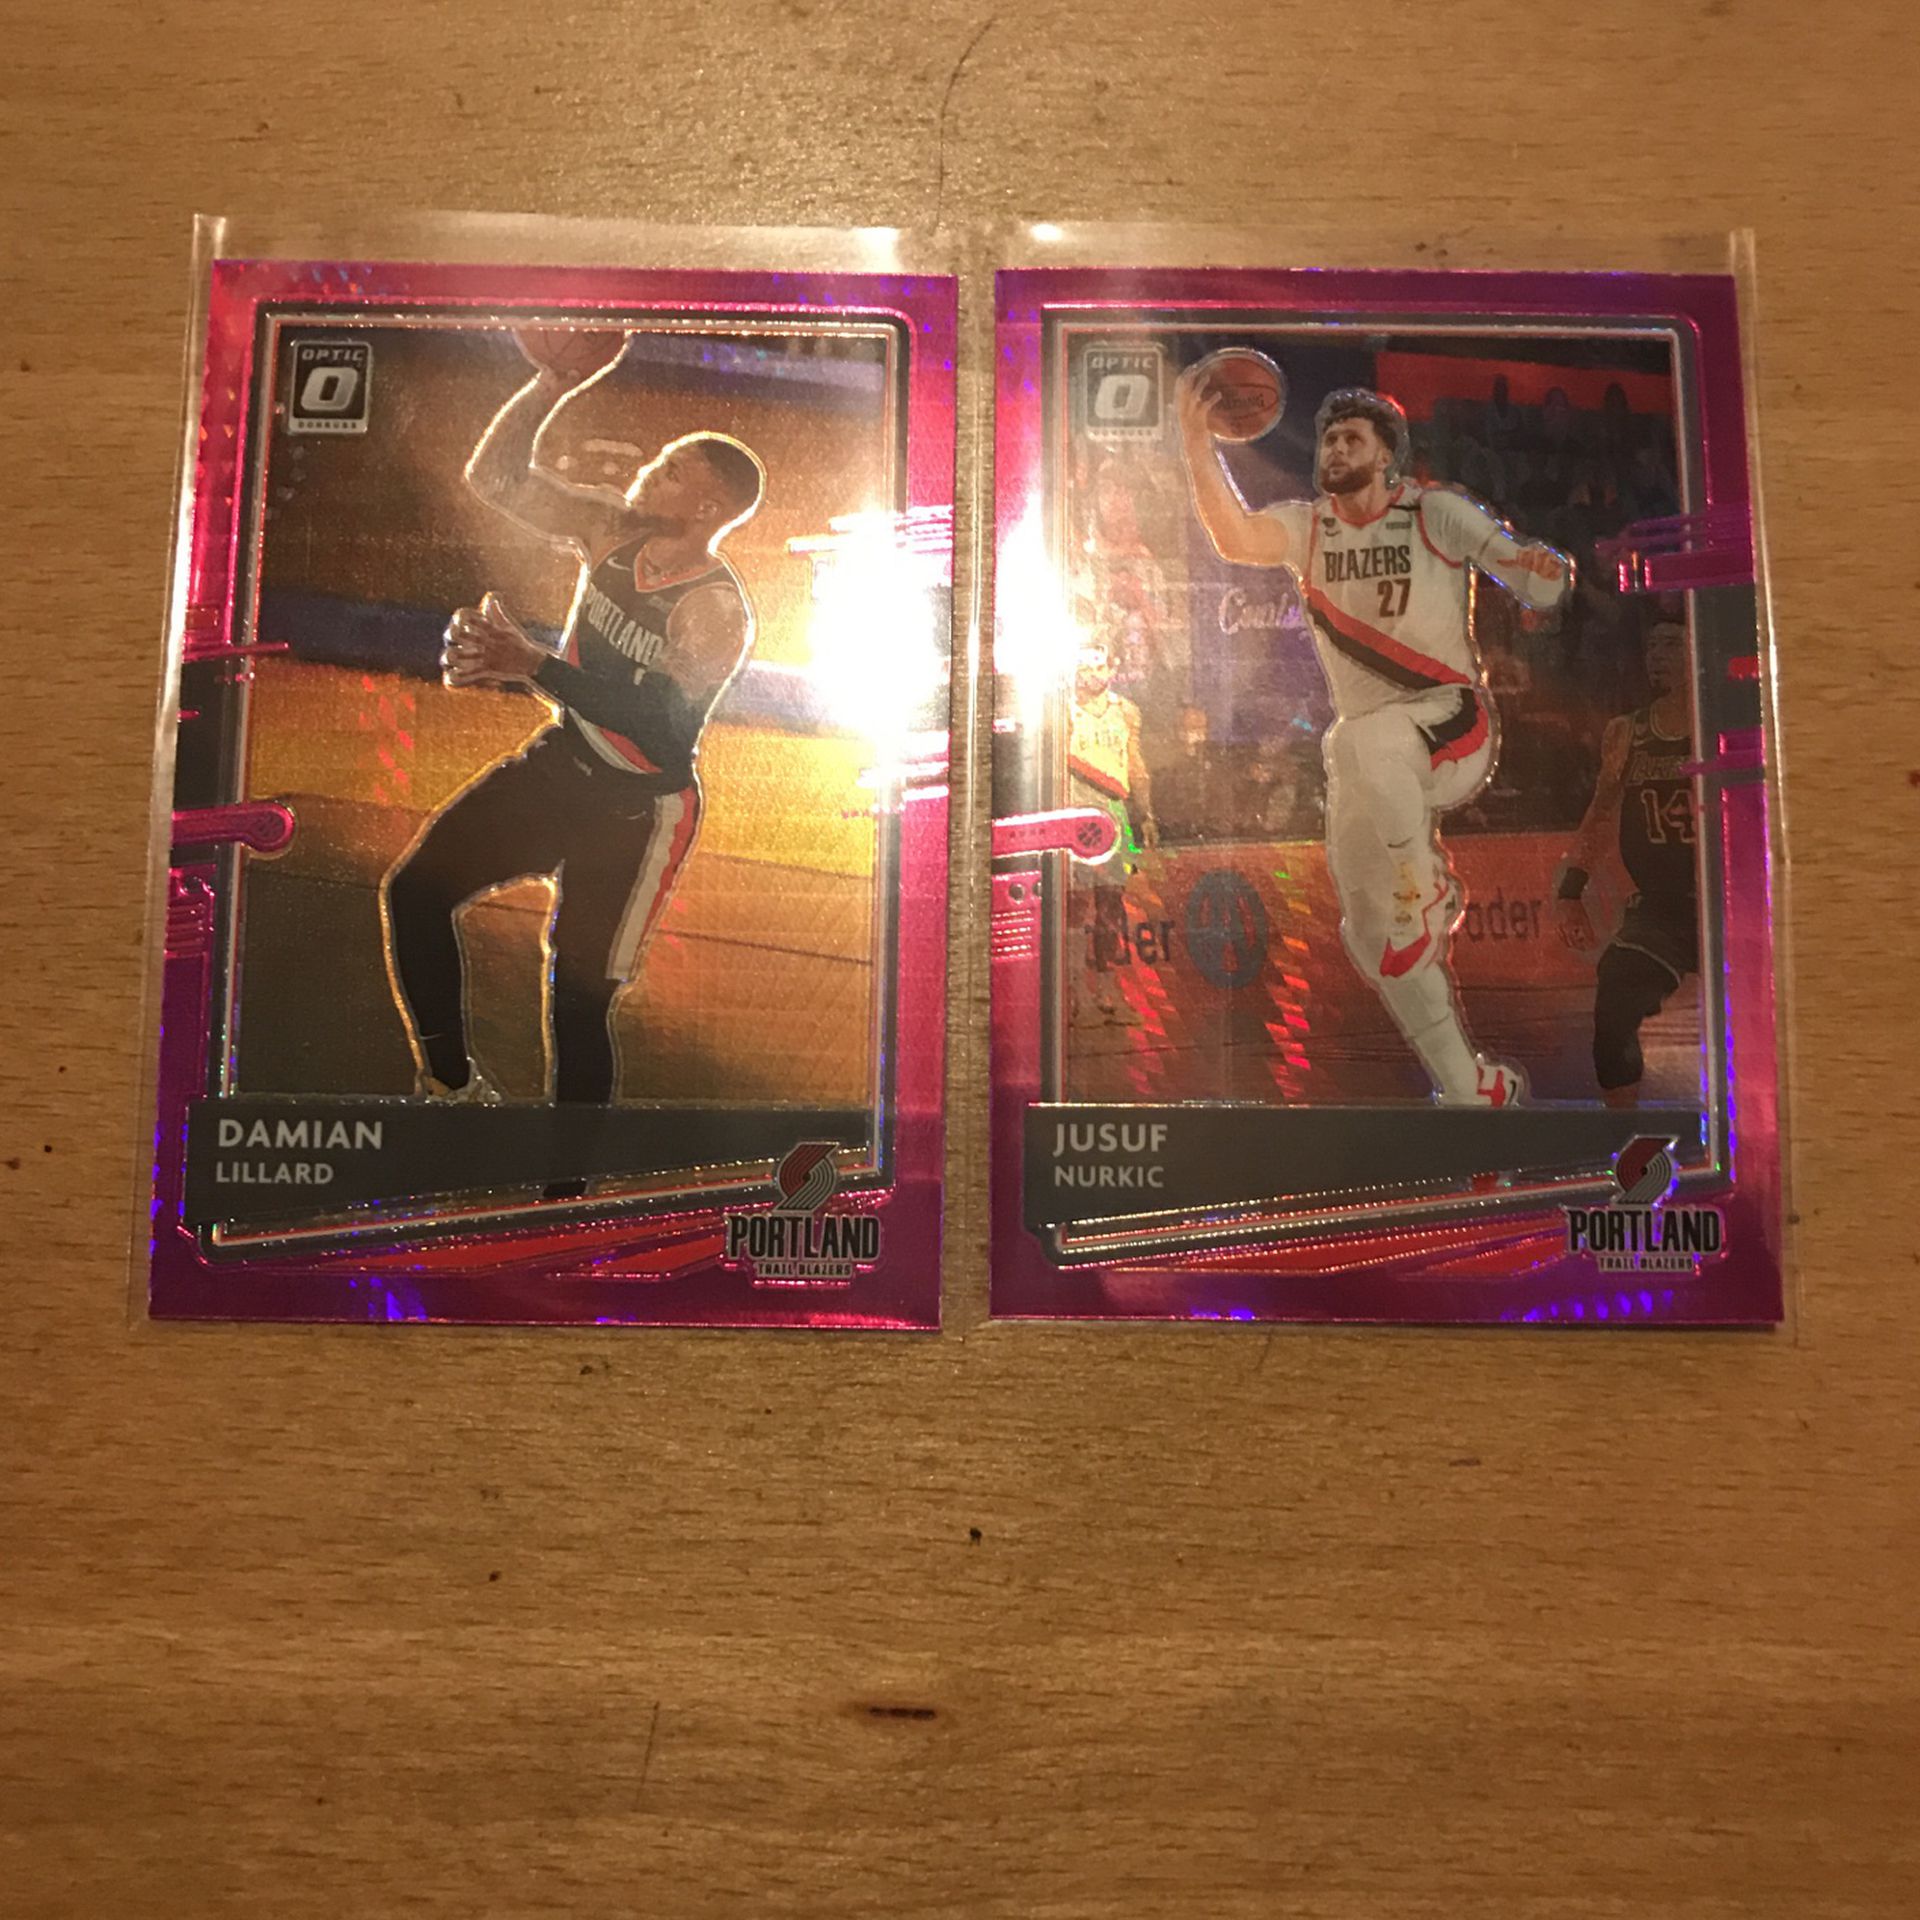 2021 OPTIC RED HYPER 2 CARD LOT 